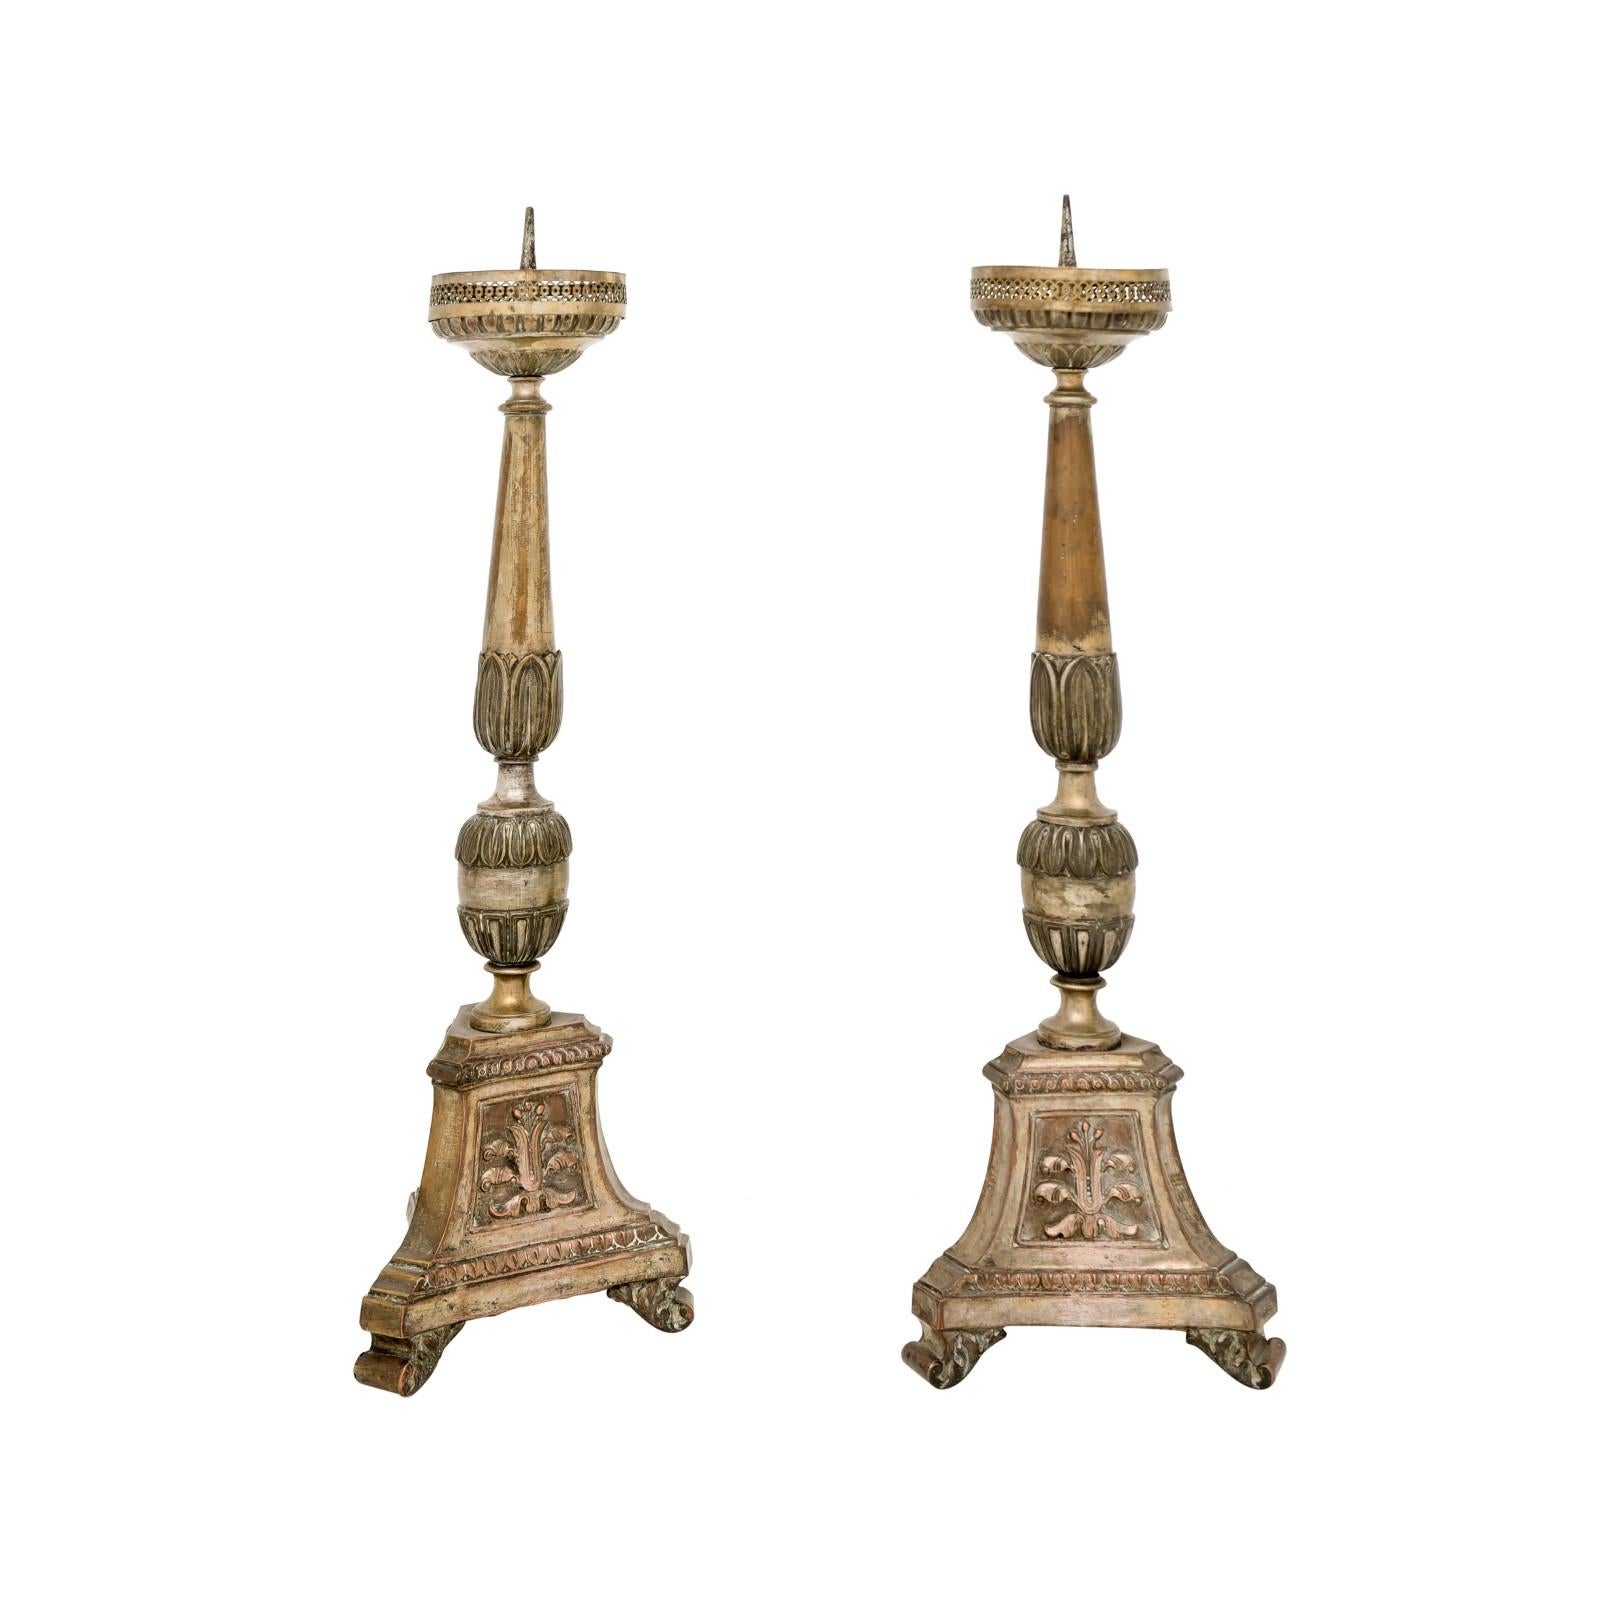 A pair of Italian metal candlesticks from the 19th century, with silver and gold tones, very nice authentic aged finish carved foliage and tripartite bases. Created in Italy during the 19th century, each of this pair of candlesticks features a